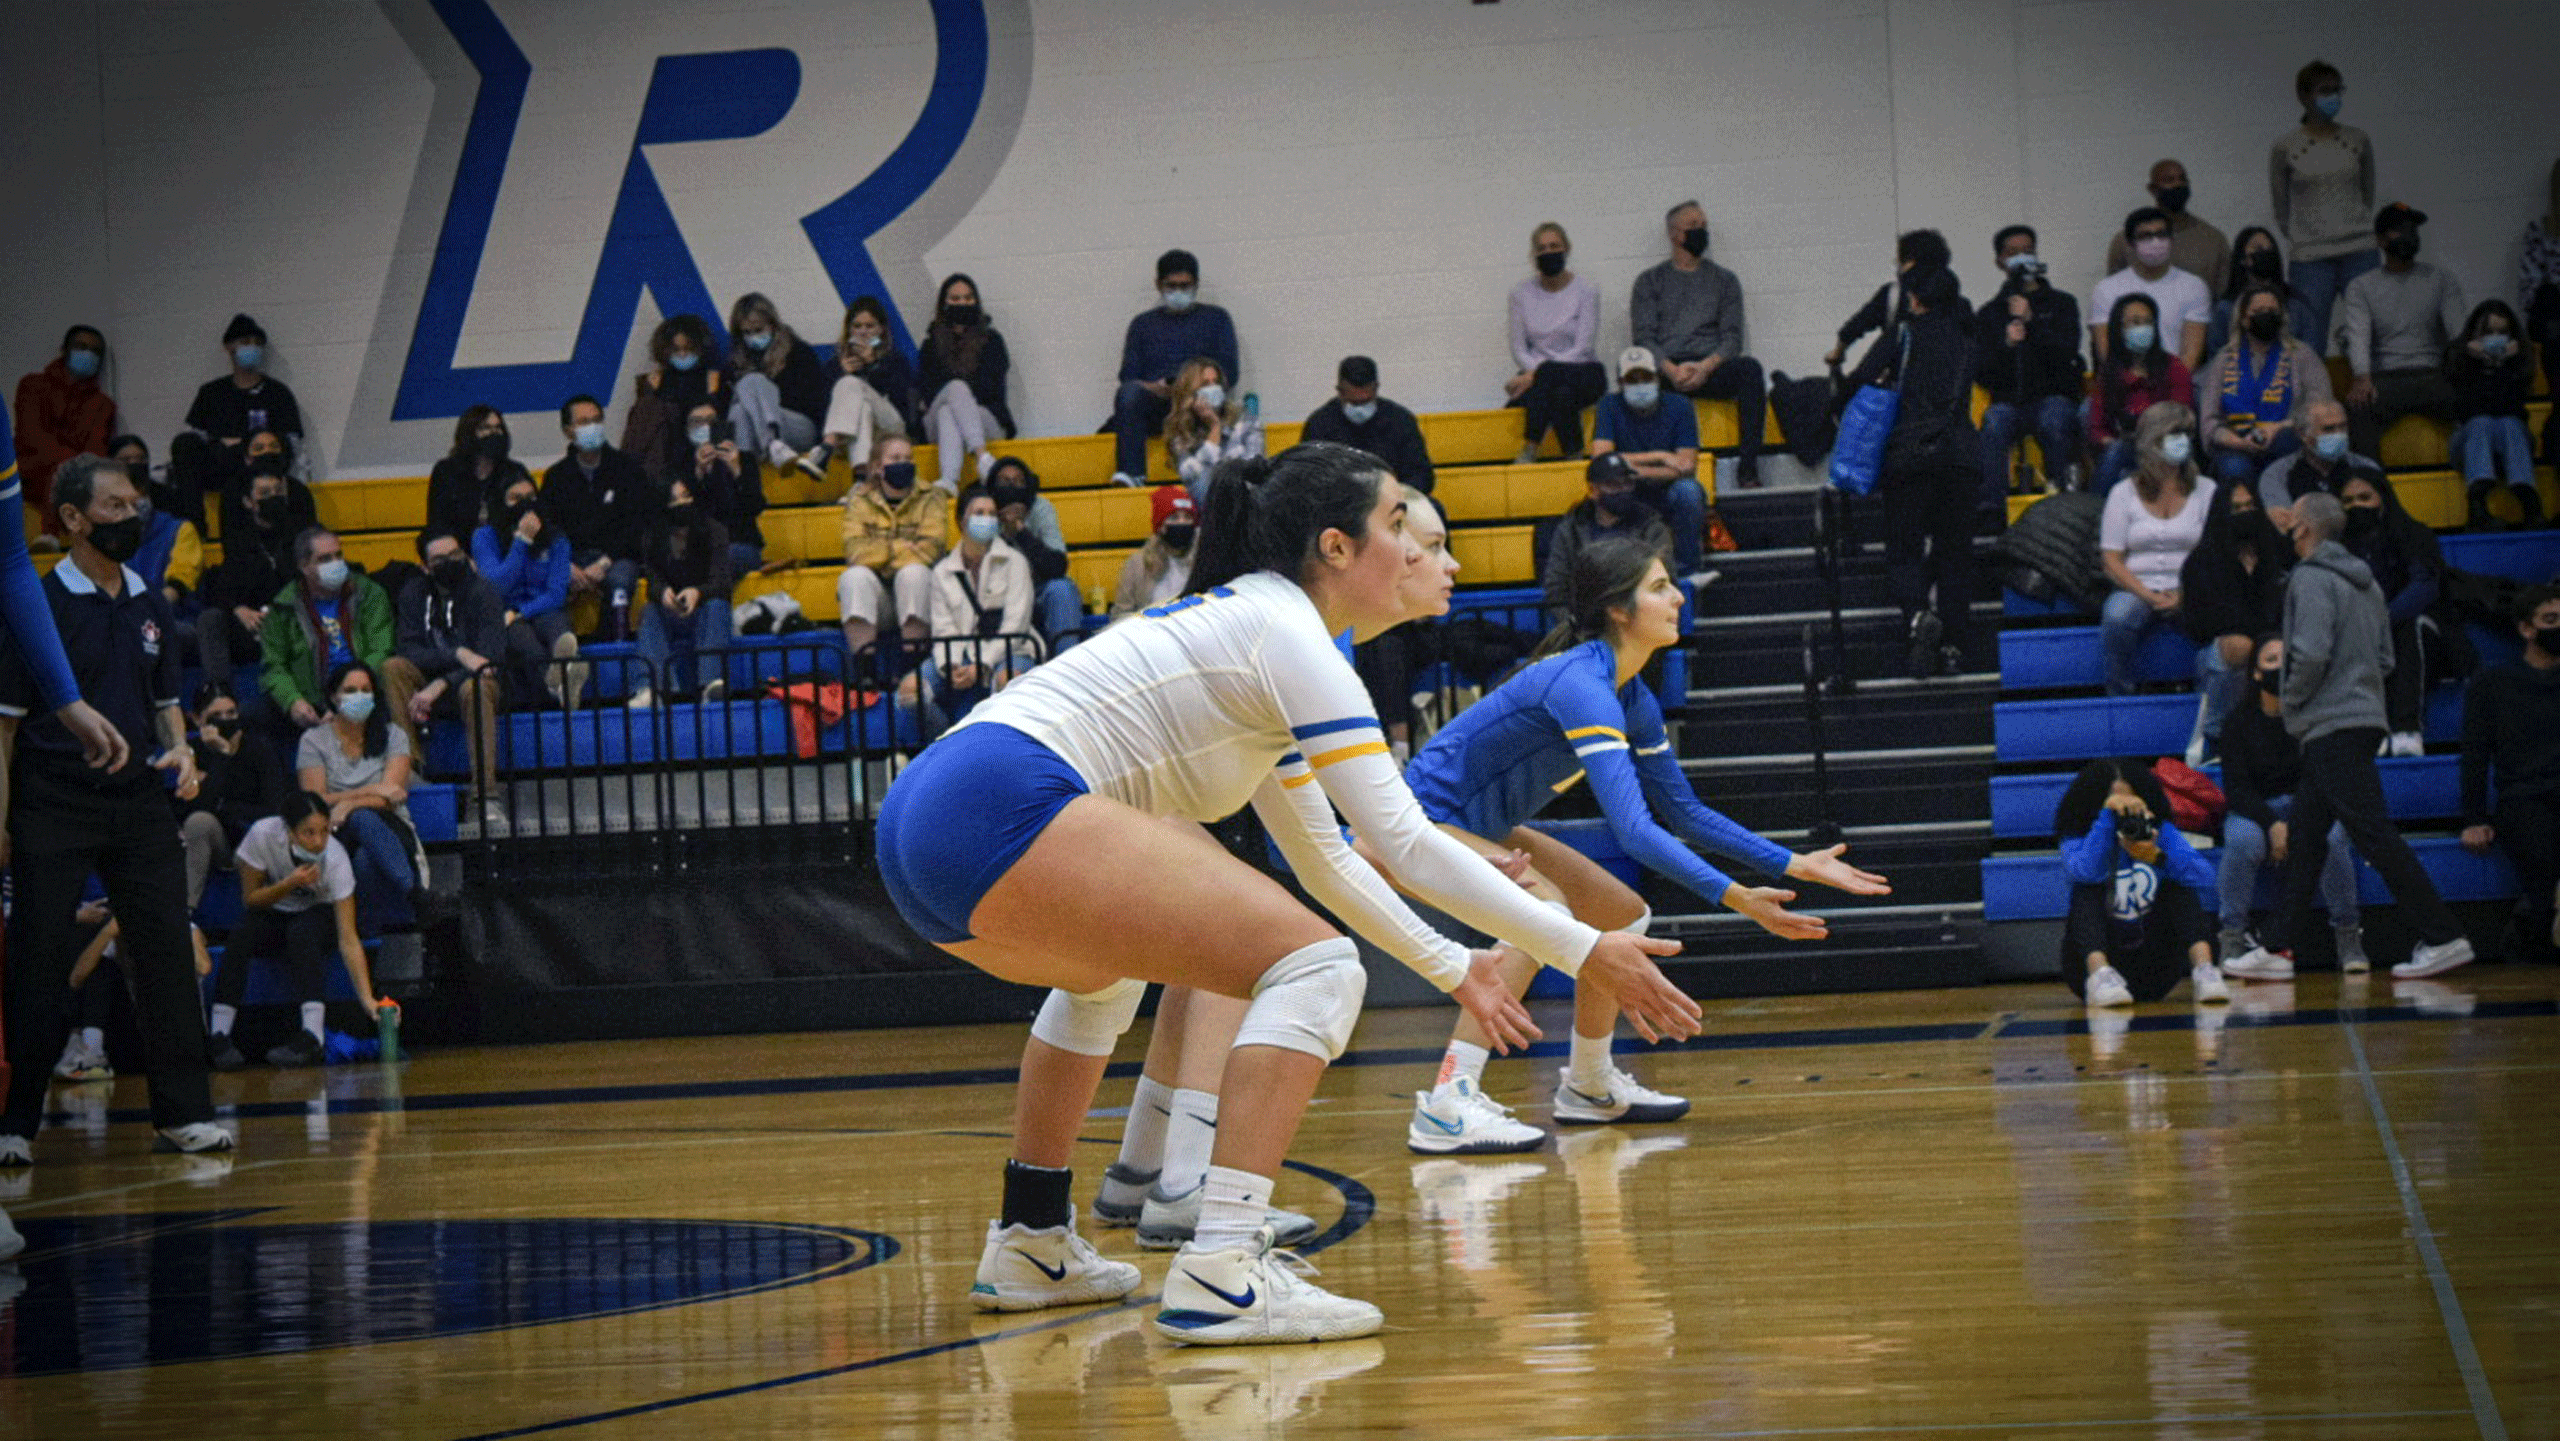 A Rams women's volleyball player in a white jersey waits for the ball